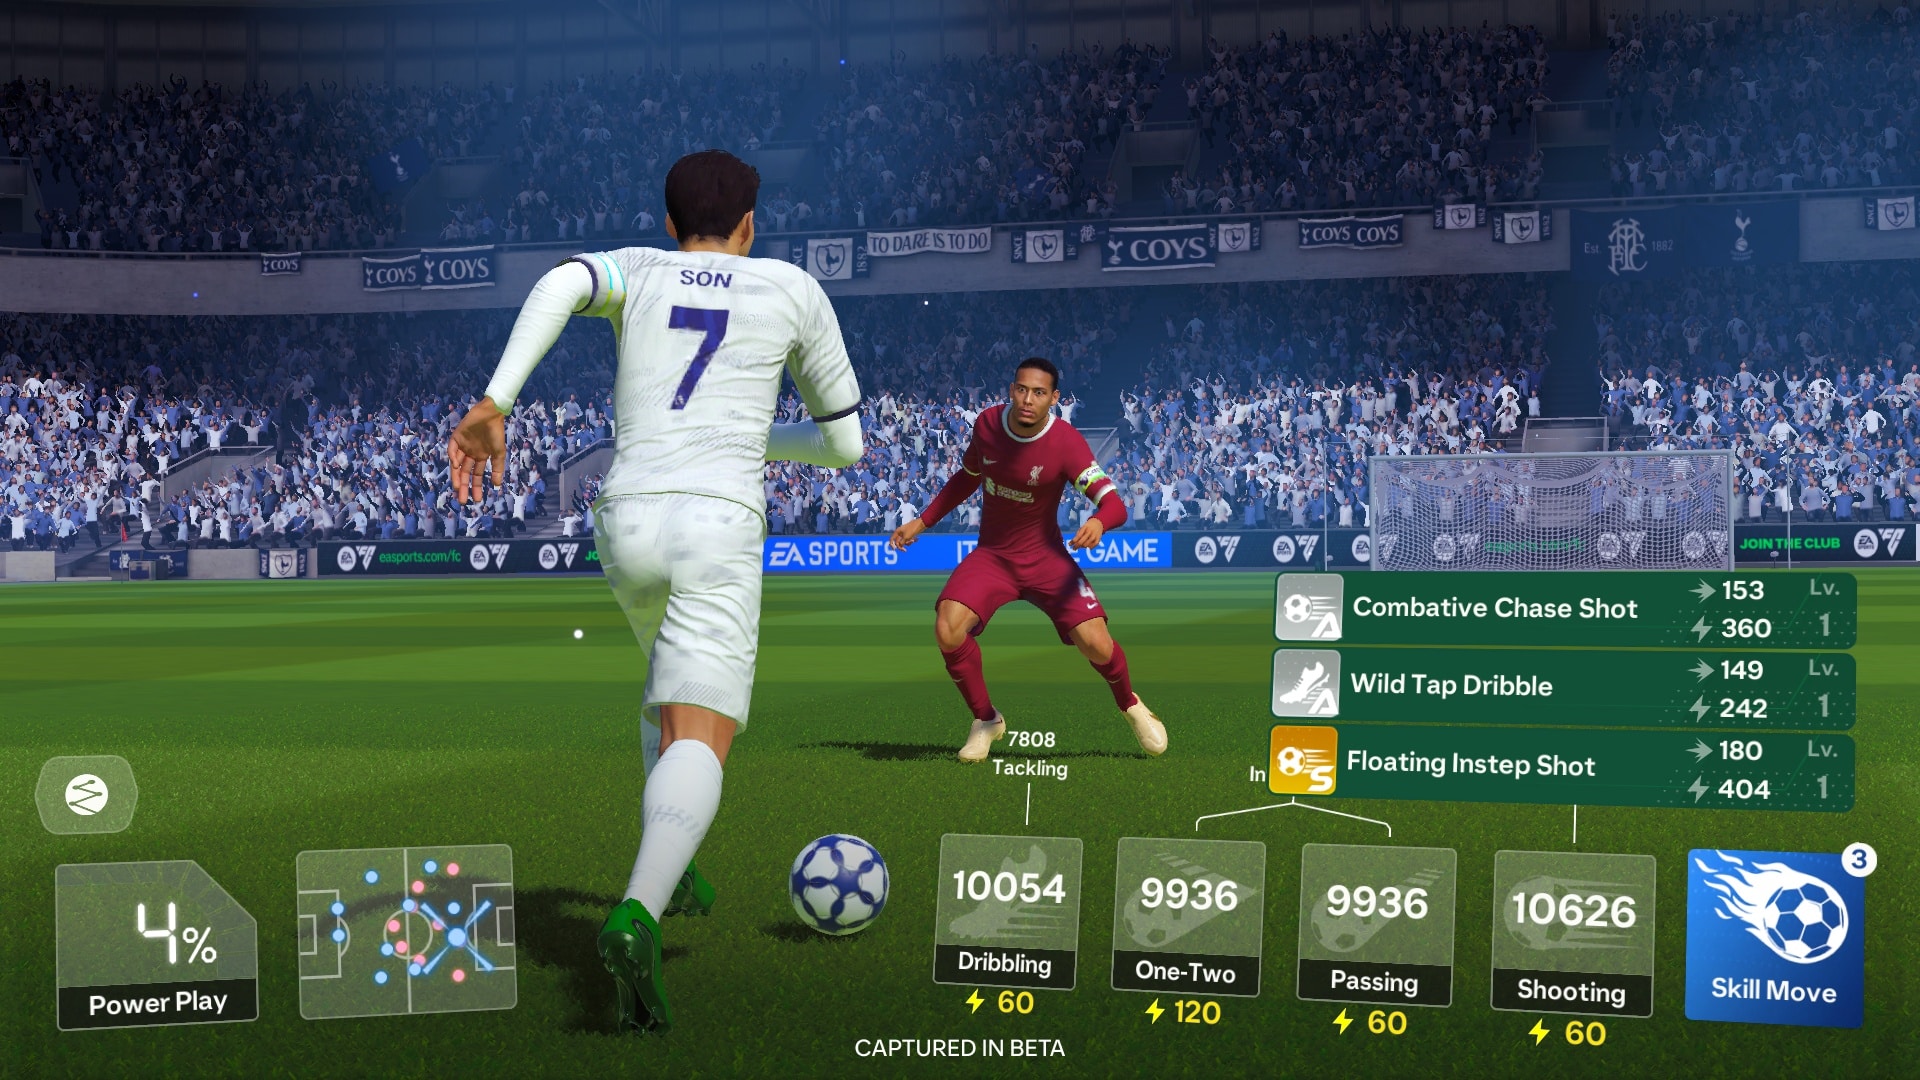 Dream League Soccer 2019 is now available on Android